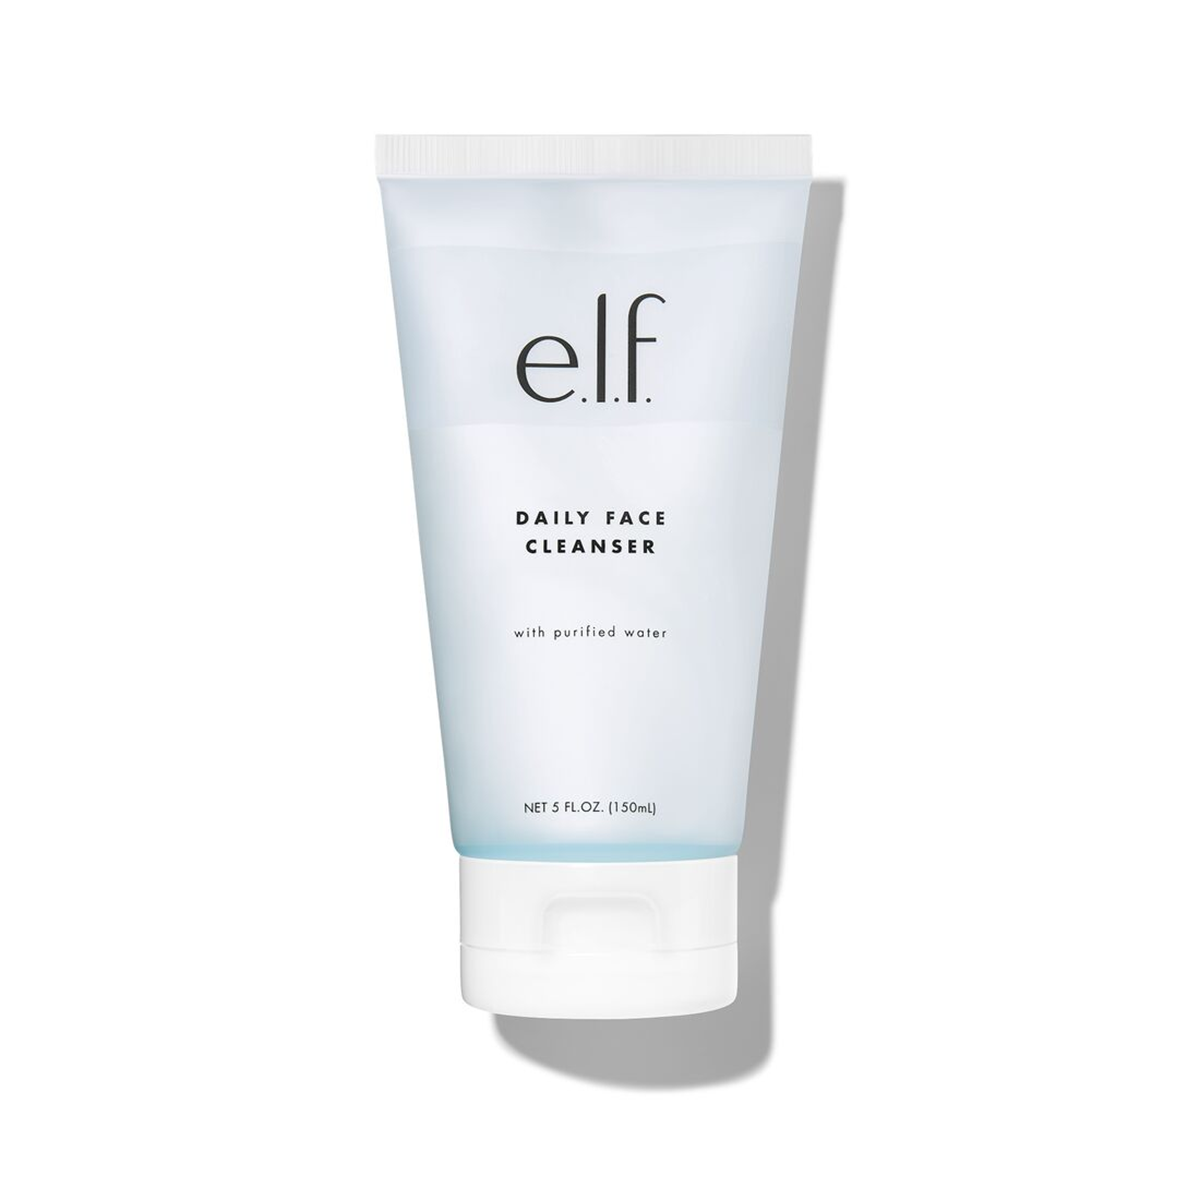 Elf Daily Face Cleanser